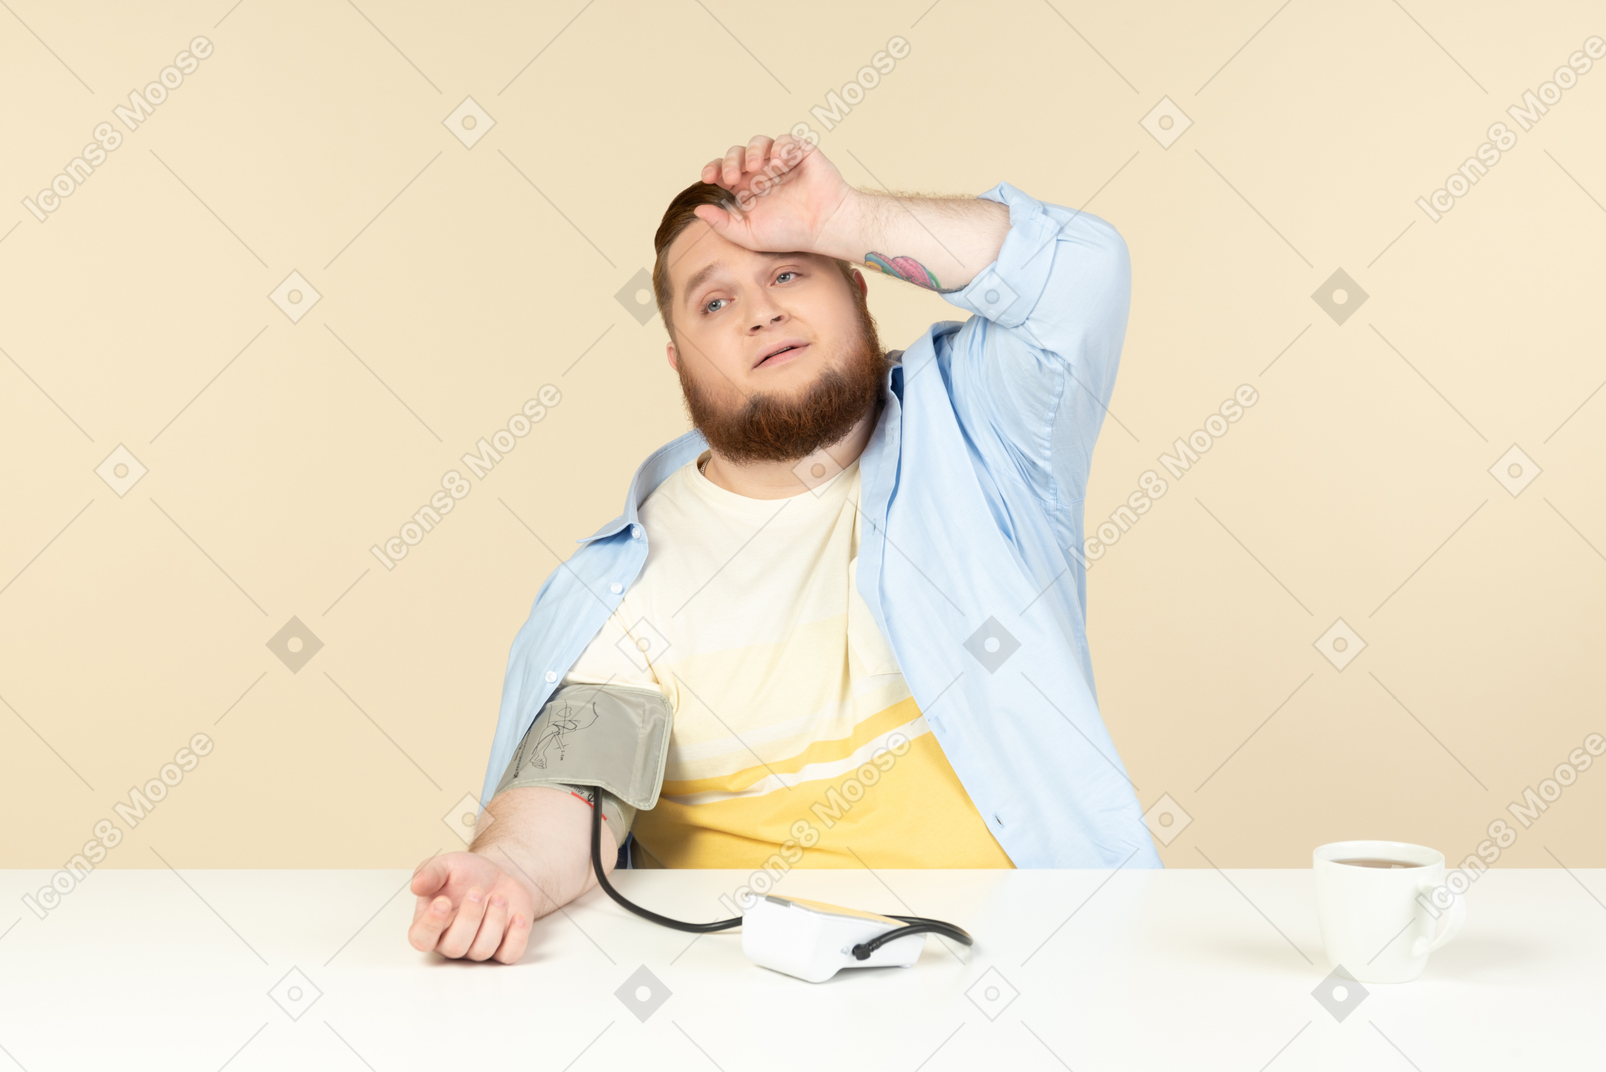 Sick looking young overweight man checking blood pressure